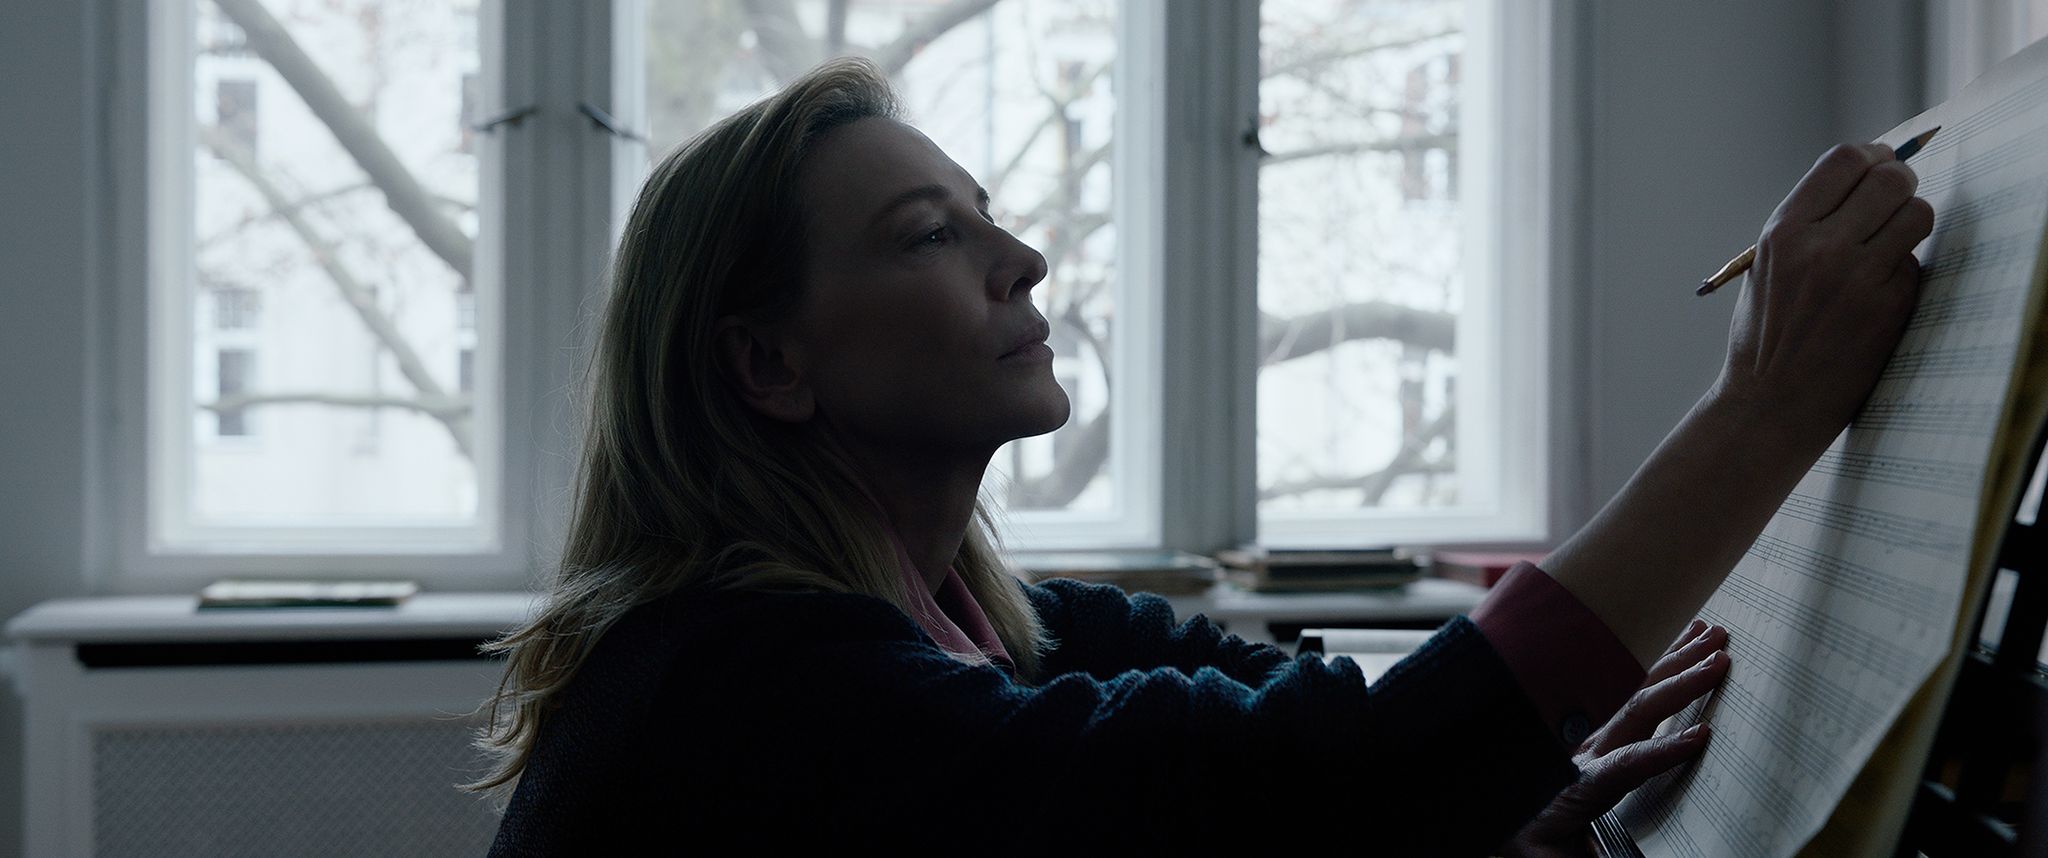 cate blanchett stars as lydia tár in director todd field's tÁr, a focus features release credit courtesy of focus features